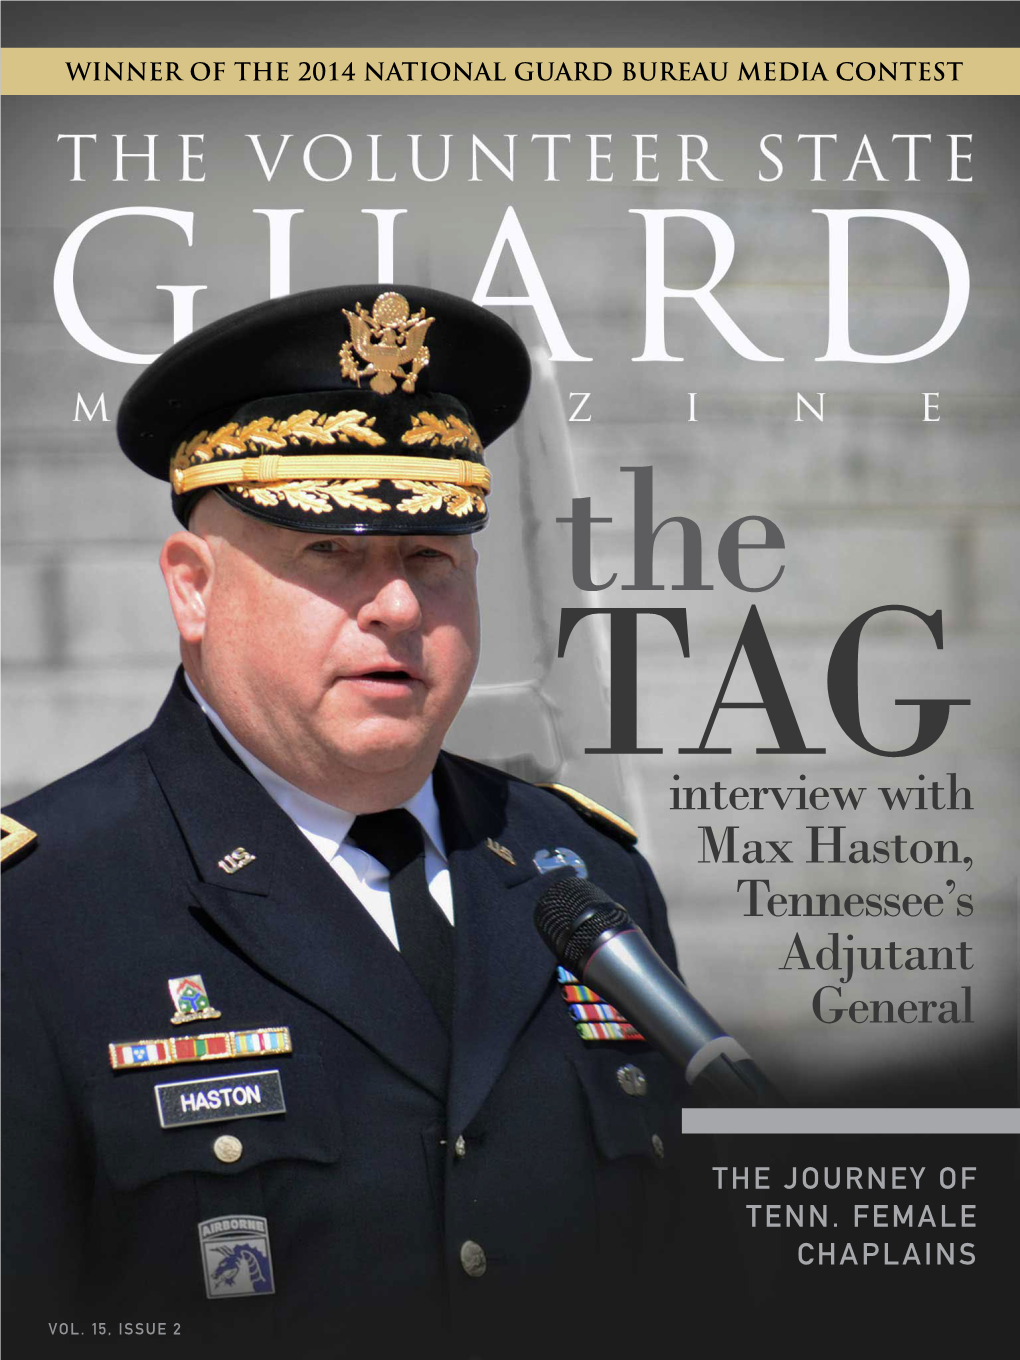 Interview with Max Haston, Tennessee's Adjutant General